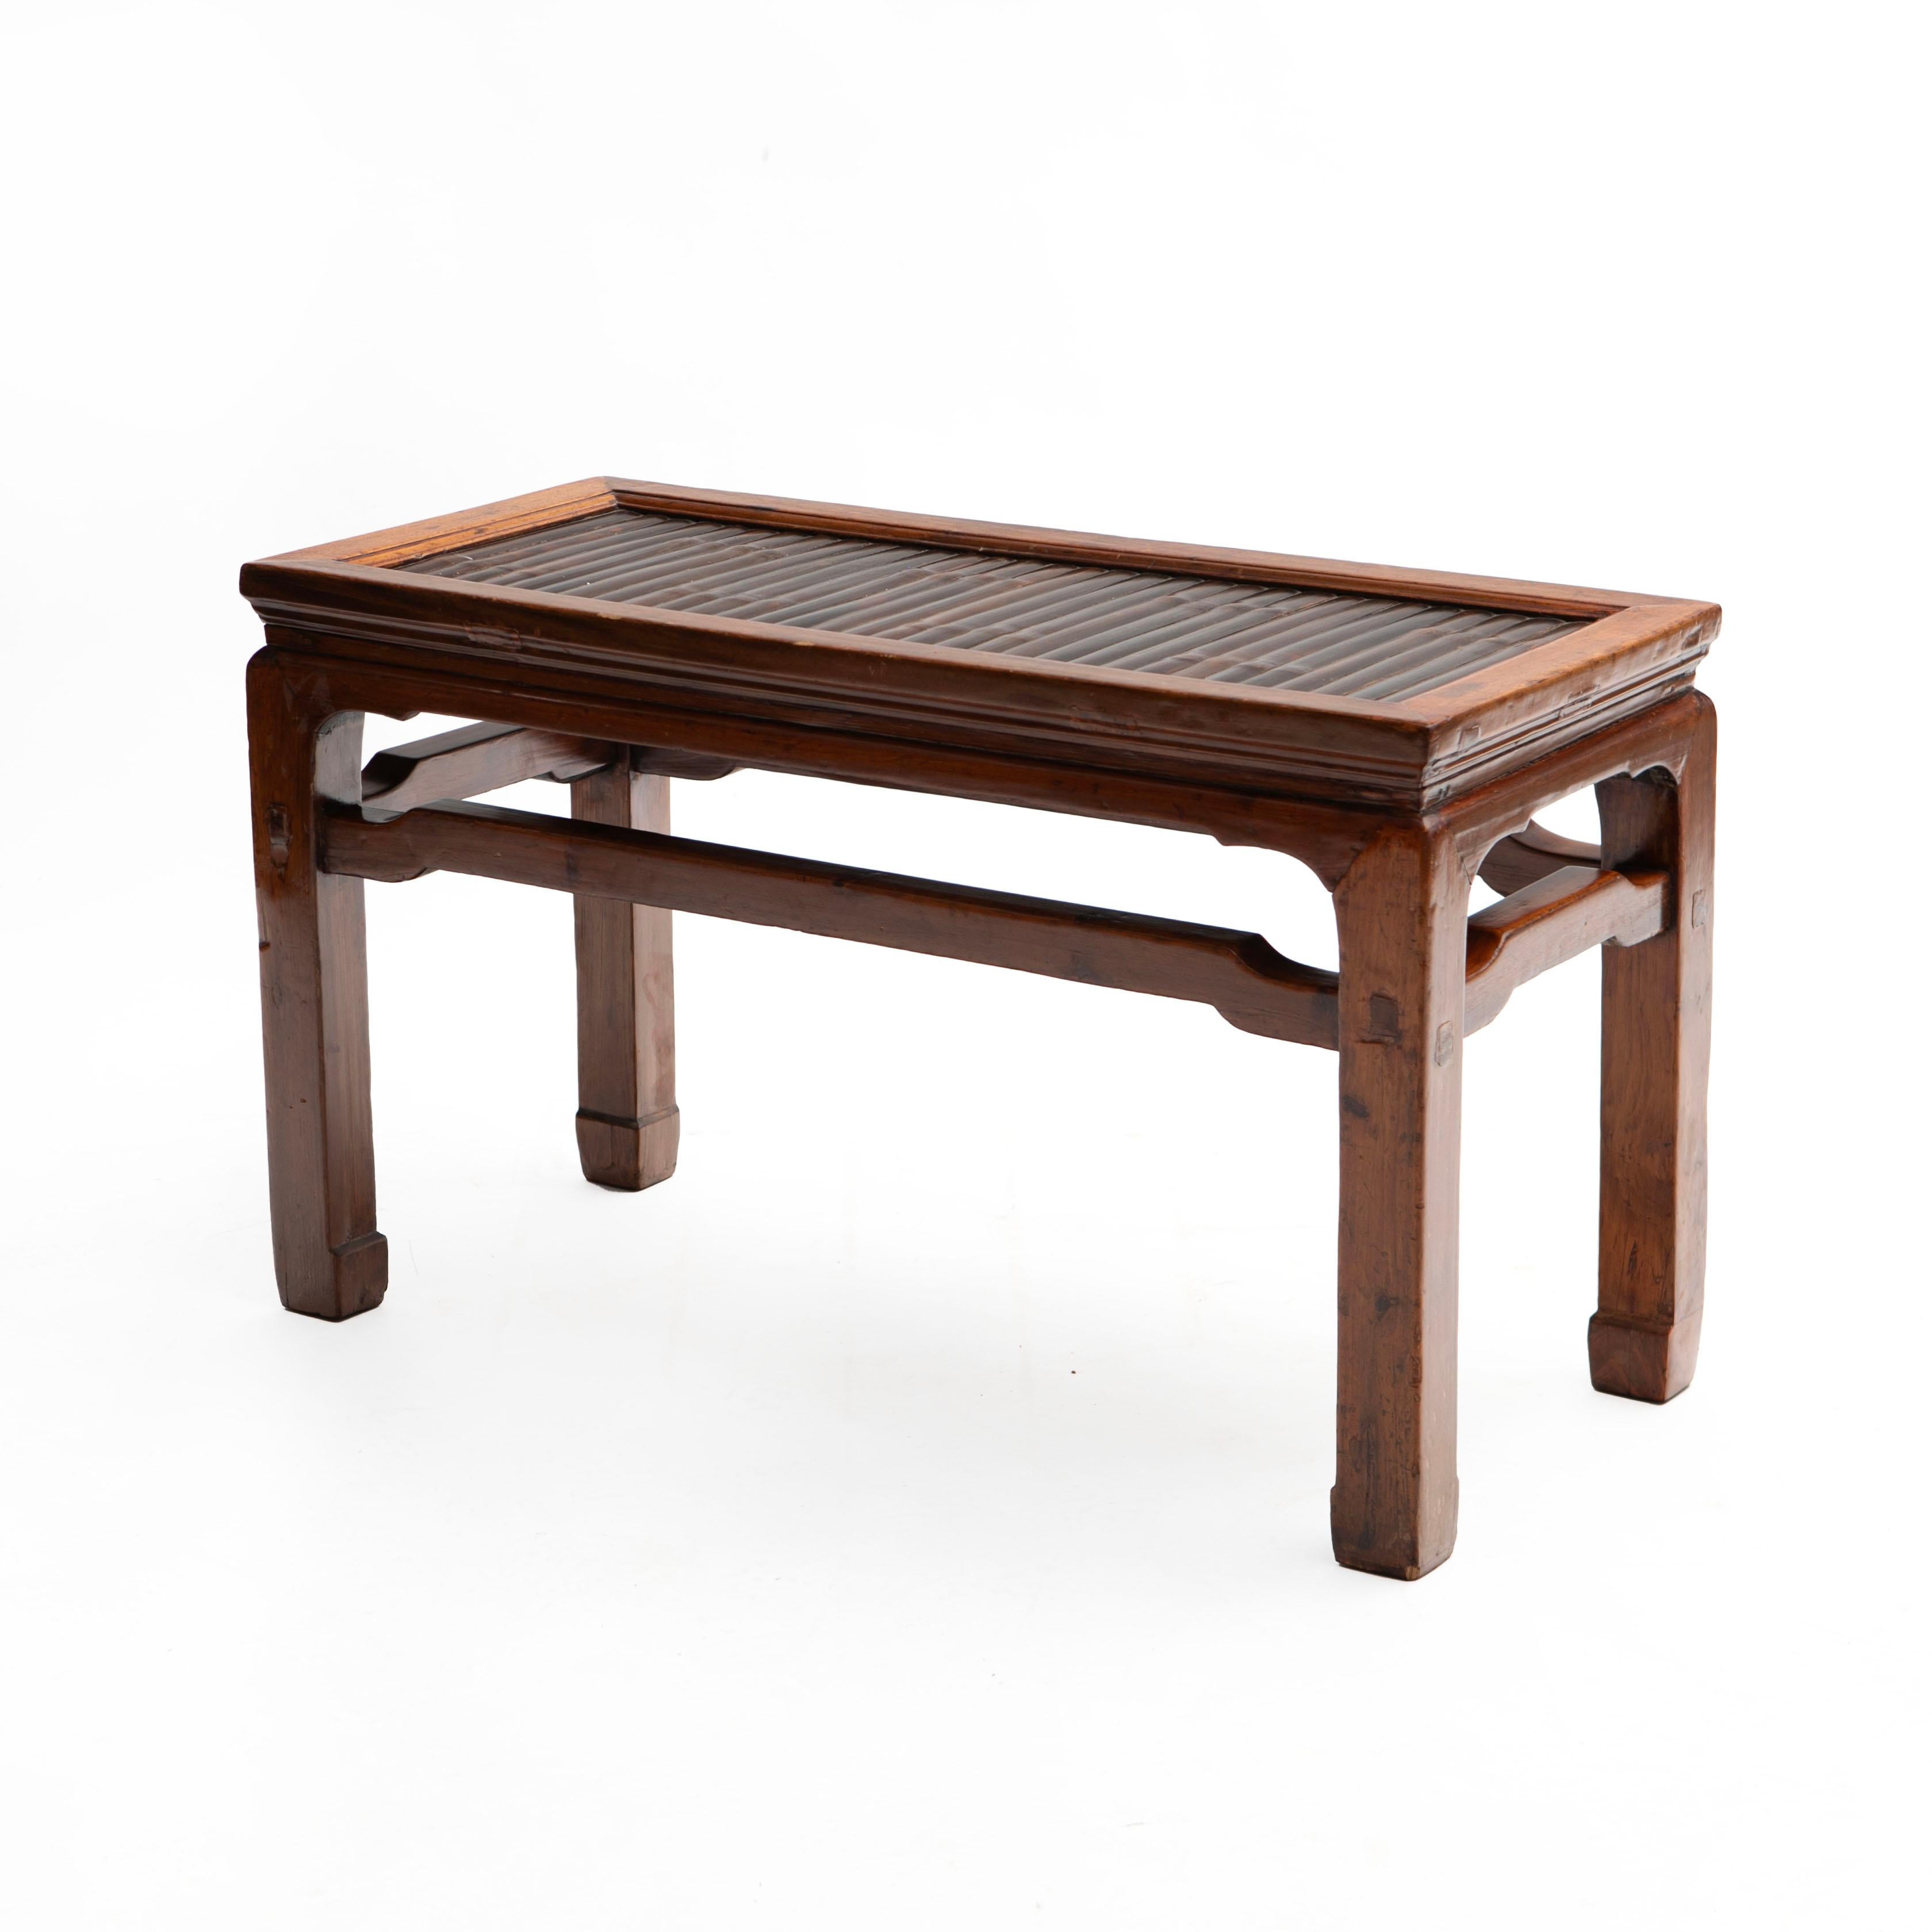 A 19th century Chinese Ming style bench with a walnut frame and a top composed of bamboo slats. Square legs joined with stretchers.

In original good antique condition with beautiful natural patina.
From Suzhou, Jiangsu Province, China, 1840-1860